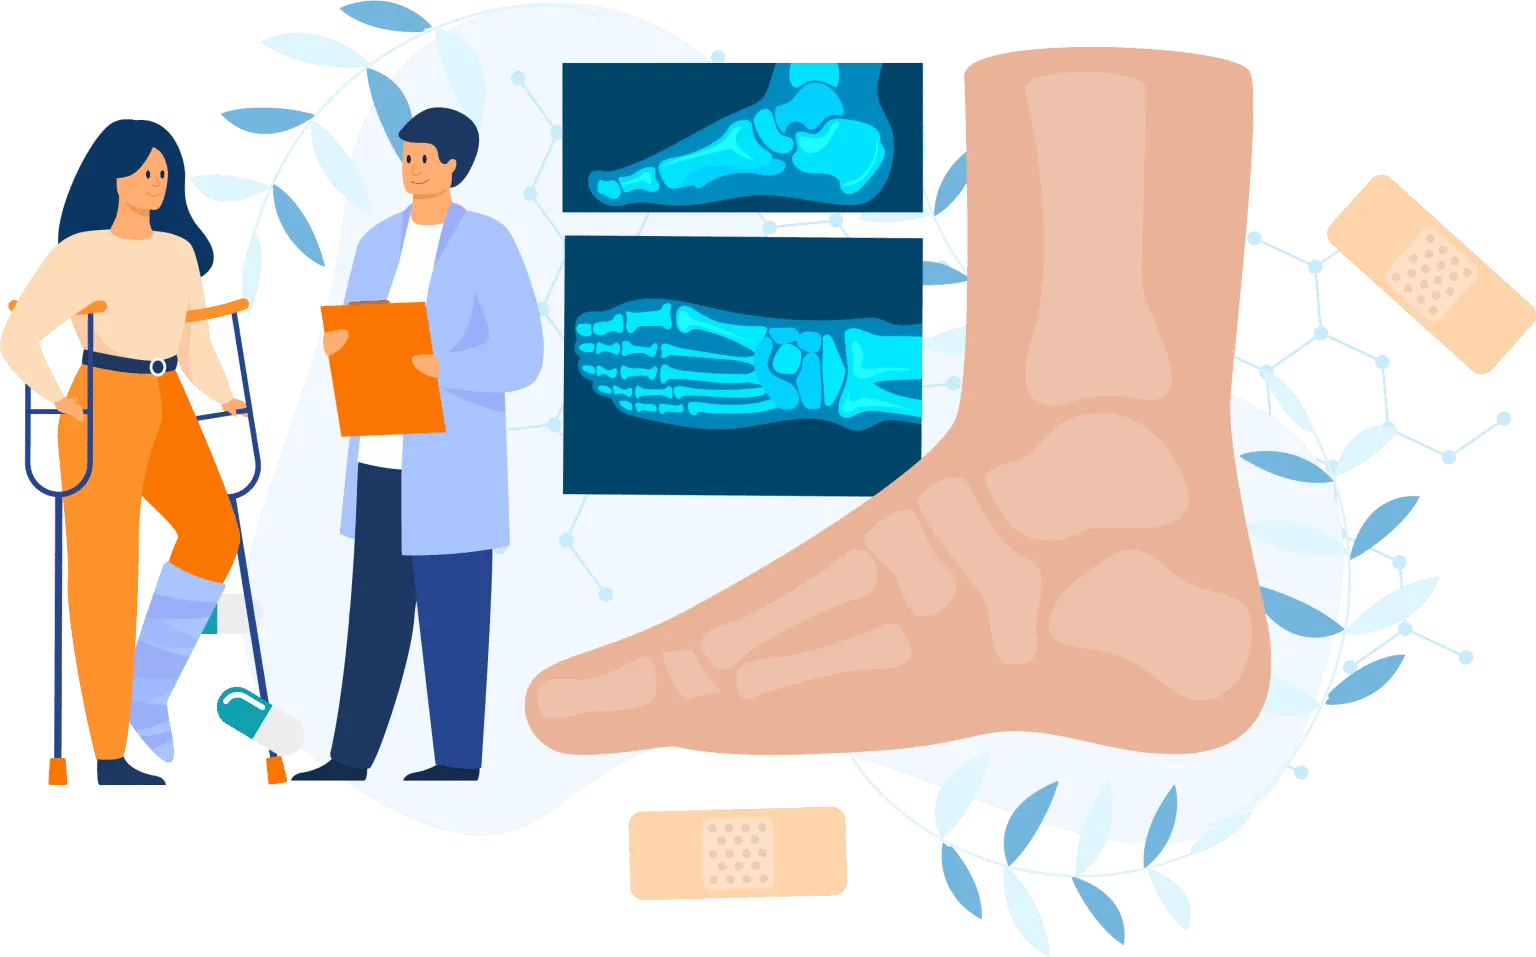 Illustration of a doctor talking to his patient who has had a surgical procedure on her ankle.